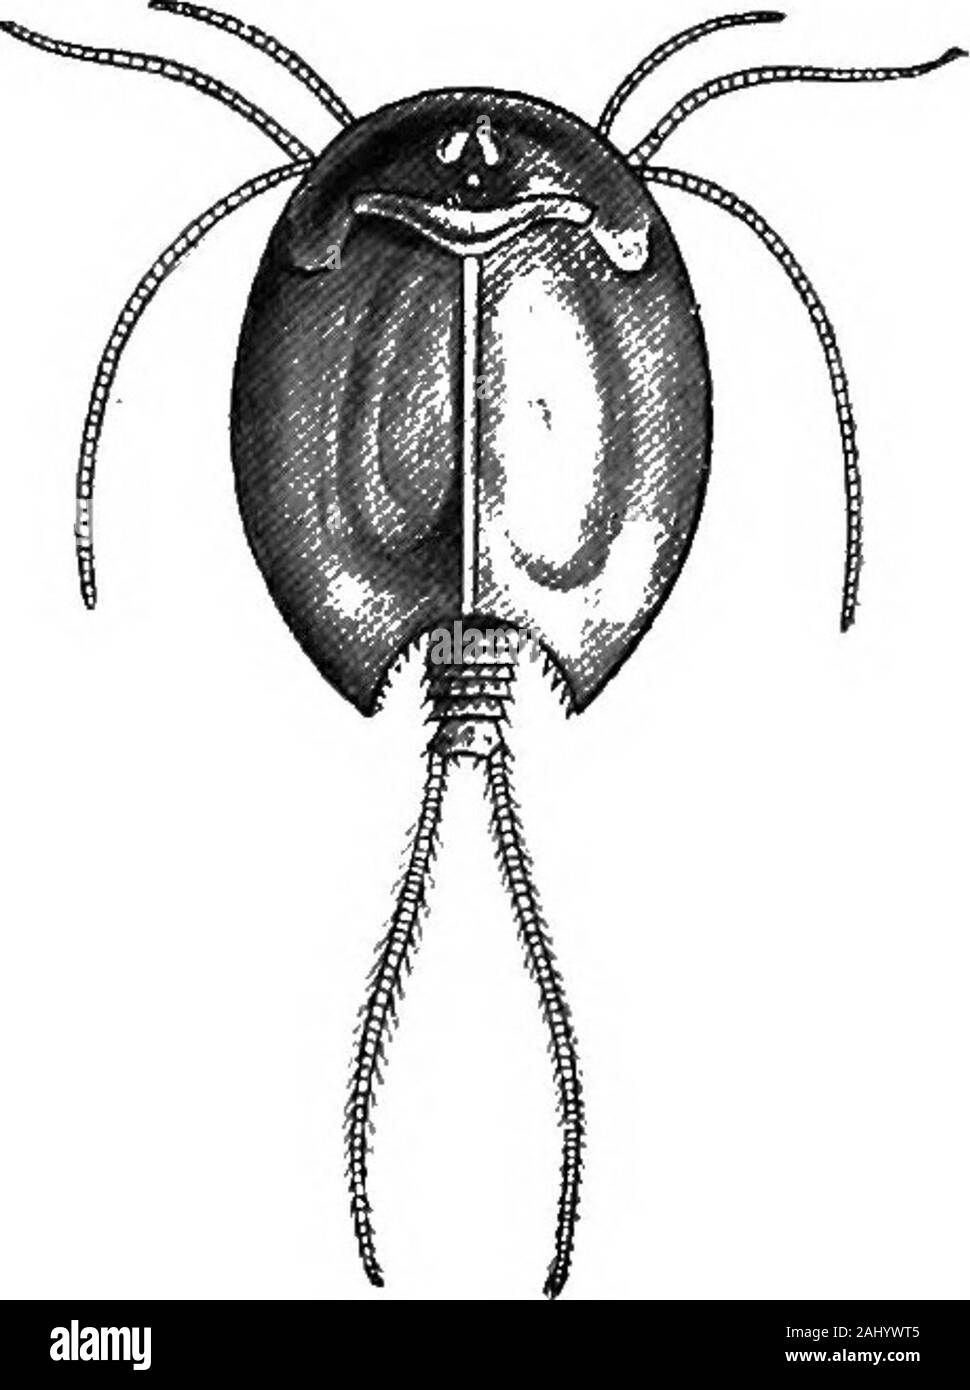 Outlines of zoology . merous segments and (lo-2(&gt;or more) foliaceous append-ages with respiratory plates.The shell is rarely absent,usually shield • like or bi-valved. The heart is a longdorsal vessel with numerousopenings. The eggs are ableto survive prolonged desicca-tion in the mud. Branchipus, a beautifullycoloured fresh - waterform, with hardly anyshell.Artemia. Brine - shrimps.Periodically partheno-genetic. By graduallychanging the salinityof the water, Schmanke-witsch was able, in thecourse of several gen-,orations, to modify A.salina into A. mil-kausenii, and vice versa.Artemia fert Stock Photo